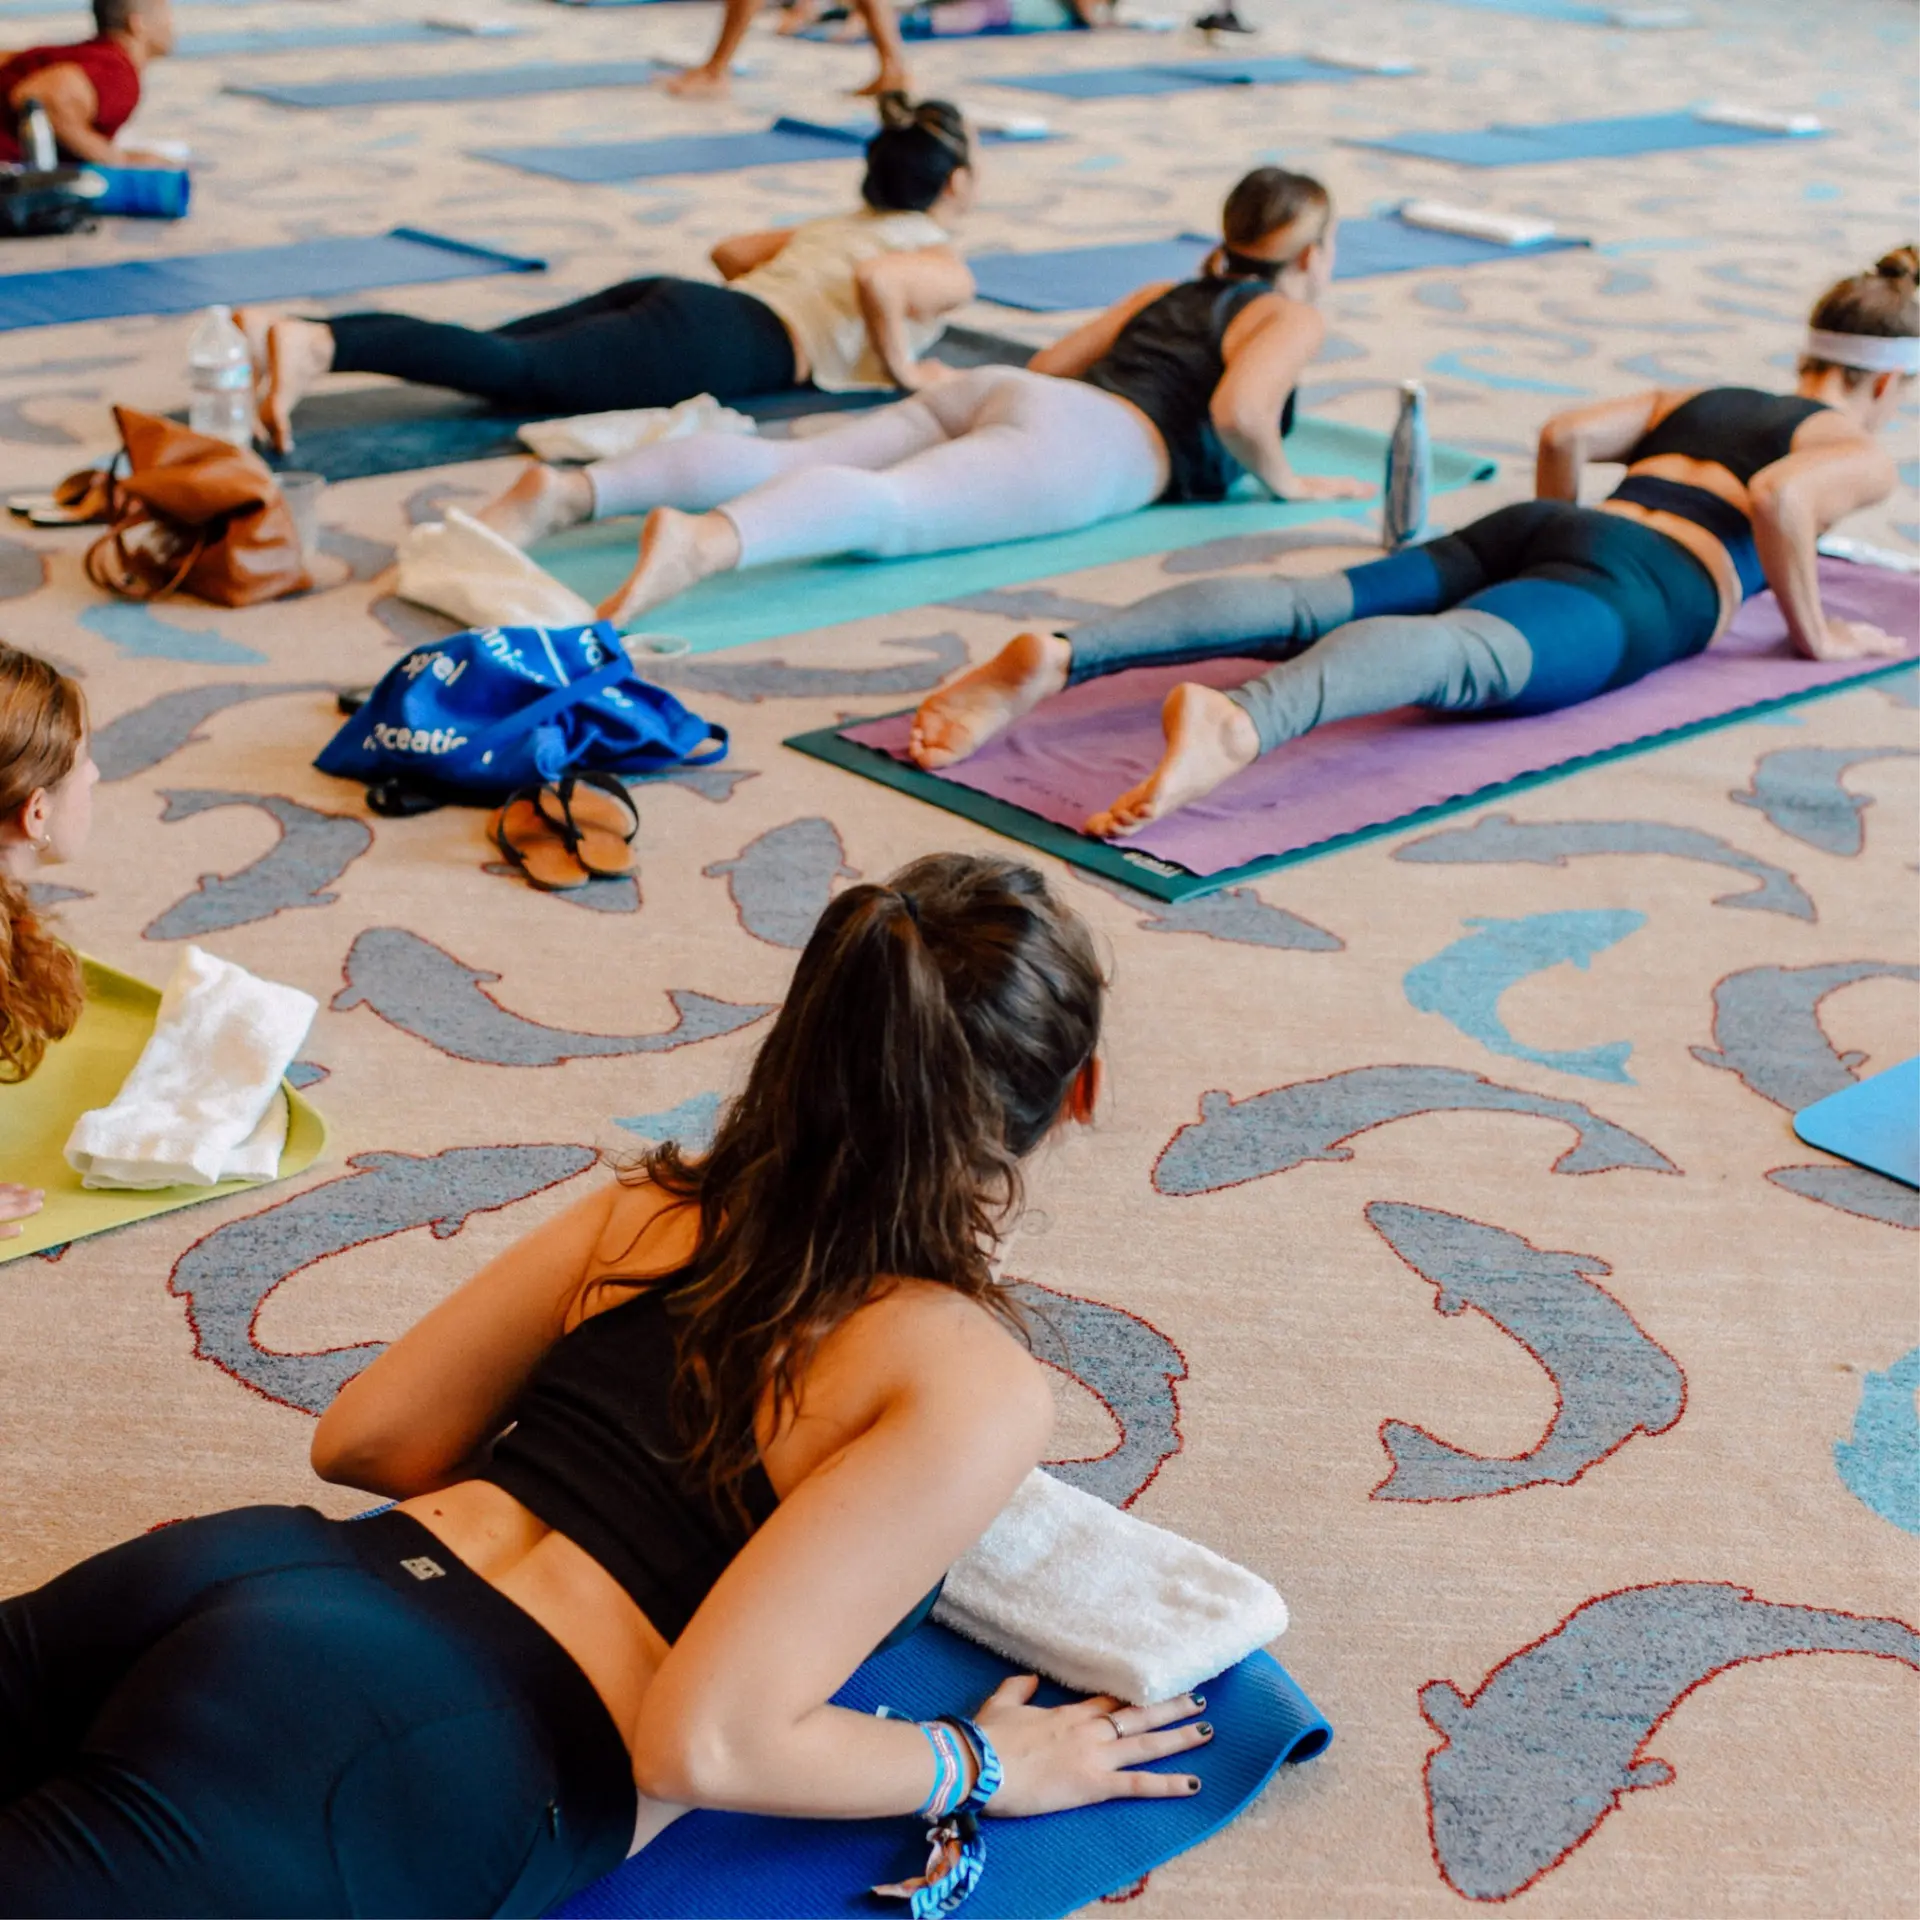 A group of girls are practicing yoga on mats.